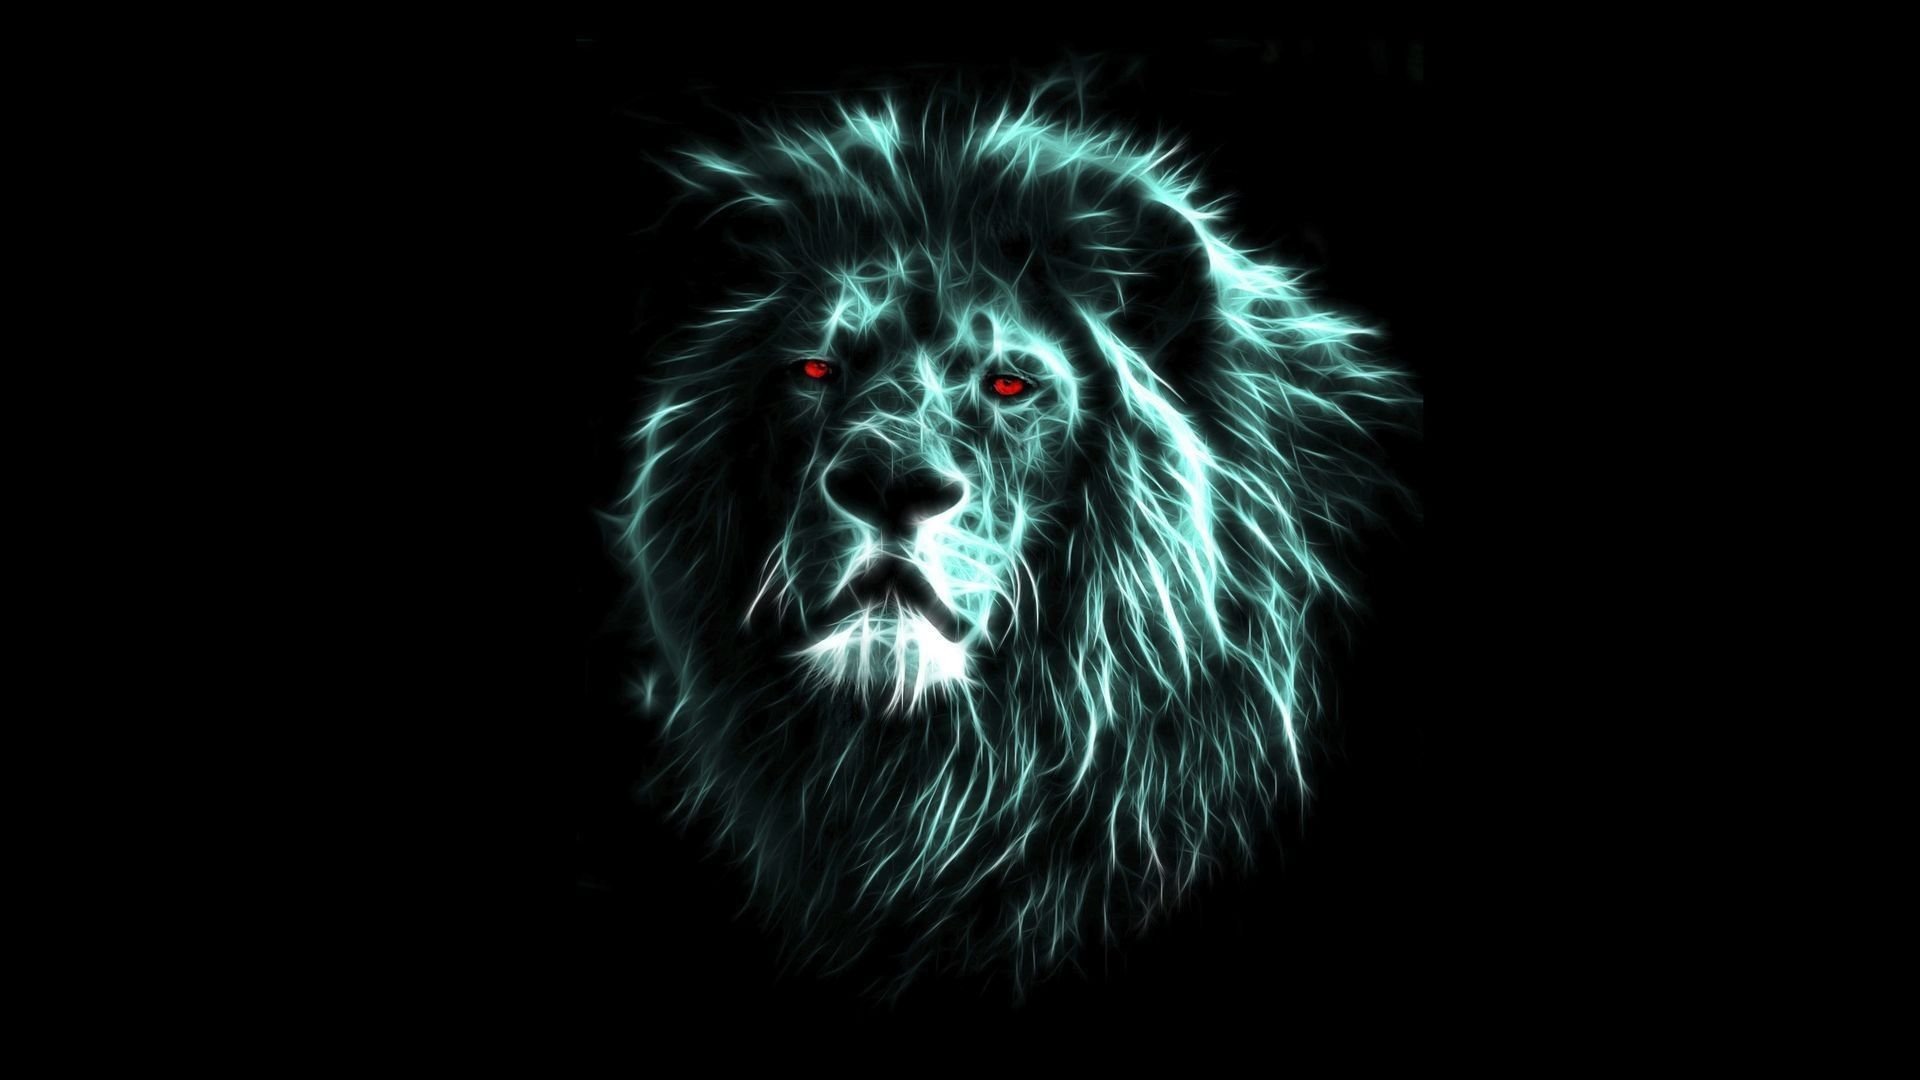 Scary Lion Wallpaper Free Scary Lion Background